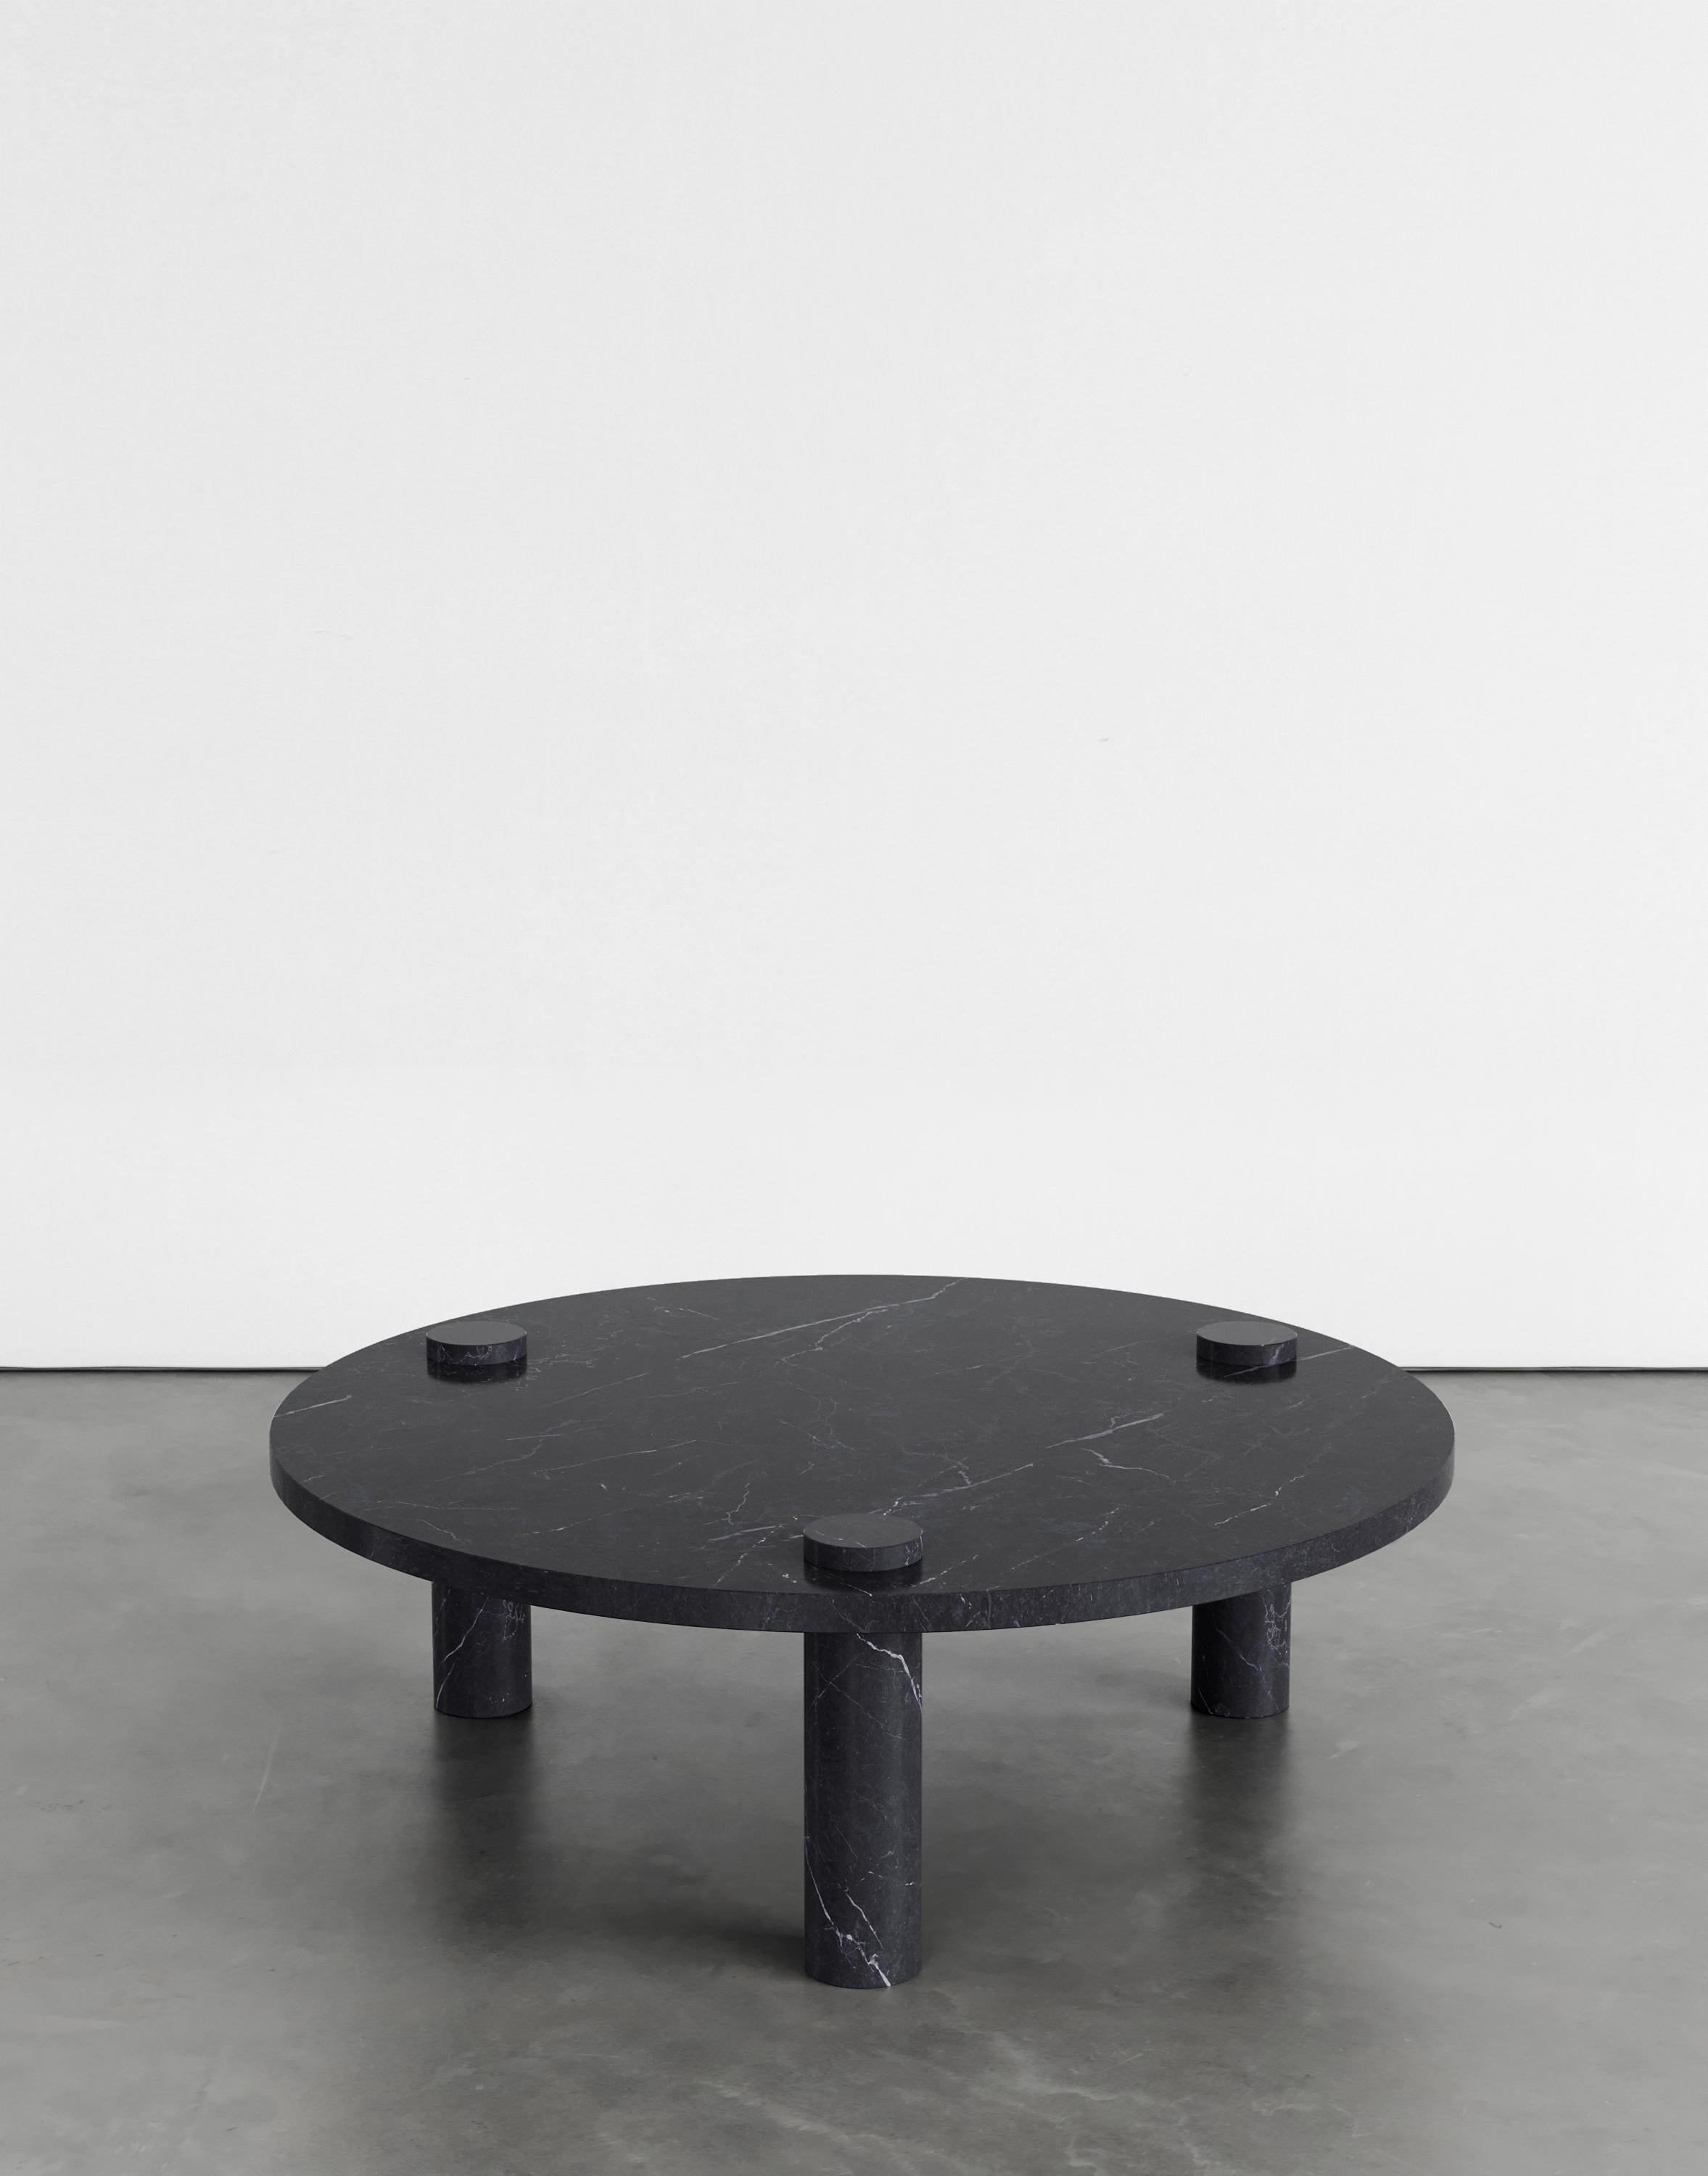 Sienna 100 coffee table by Agglomerati 
Dimensions: W 100 x H 33 cm 
Materials: Black Marquina. Available in other stones. 

Agglomerati is a London-based studio creating distinctive stone furniture. Established in 2019 by Australian designer